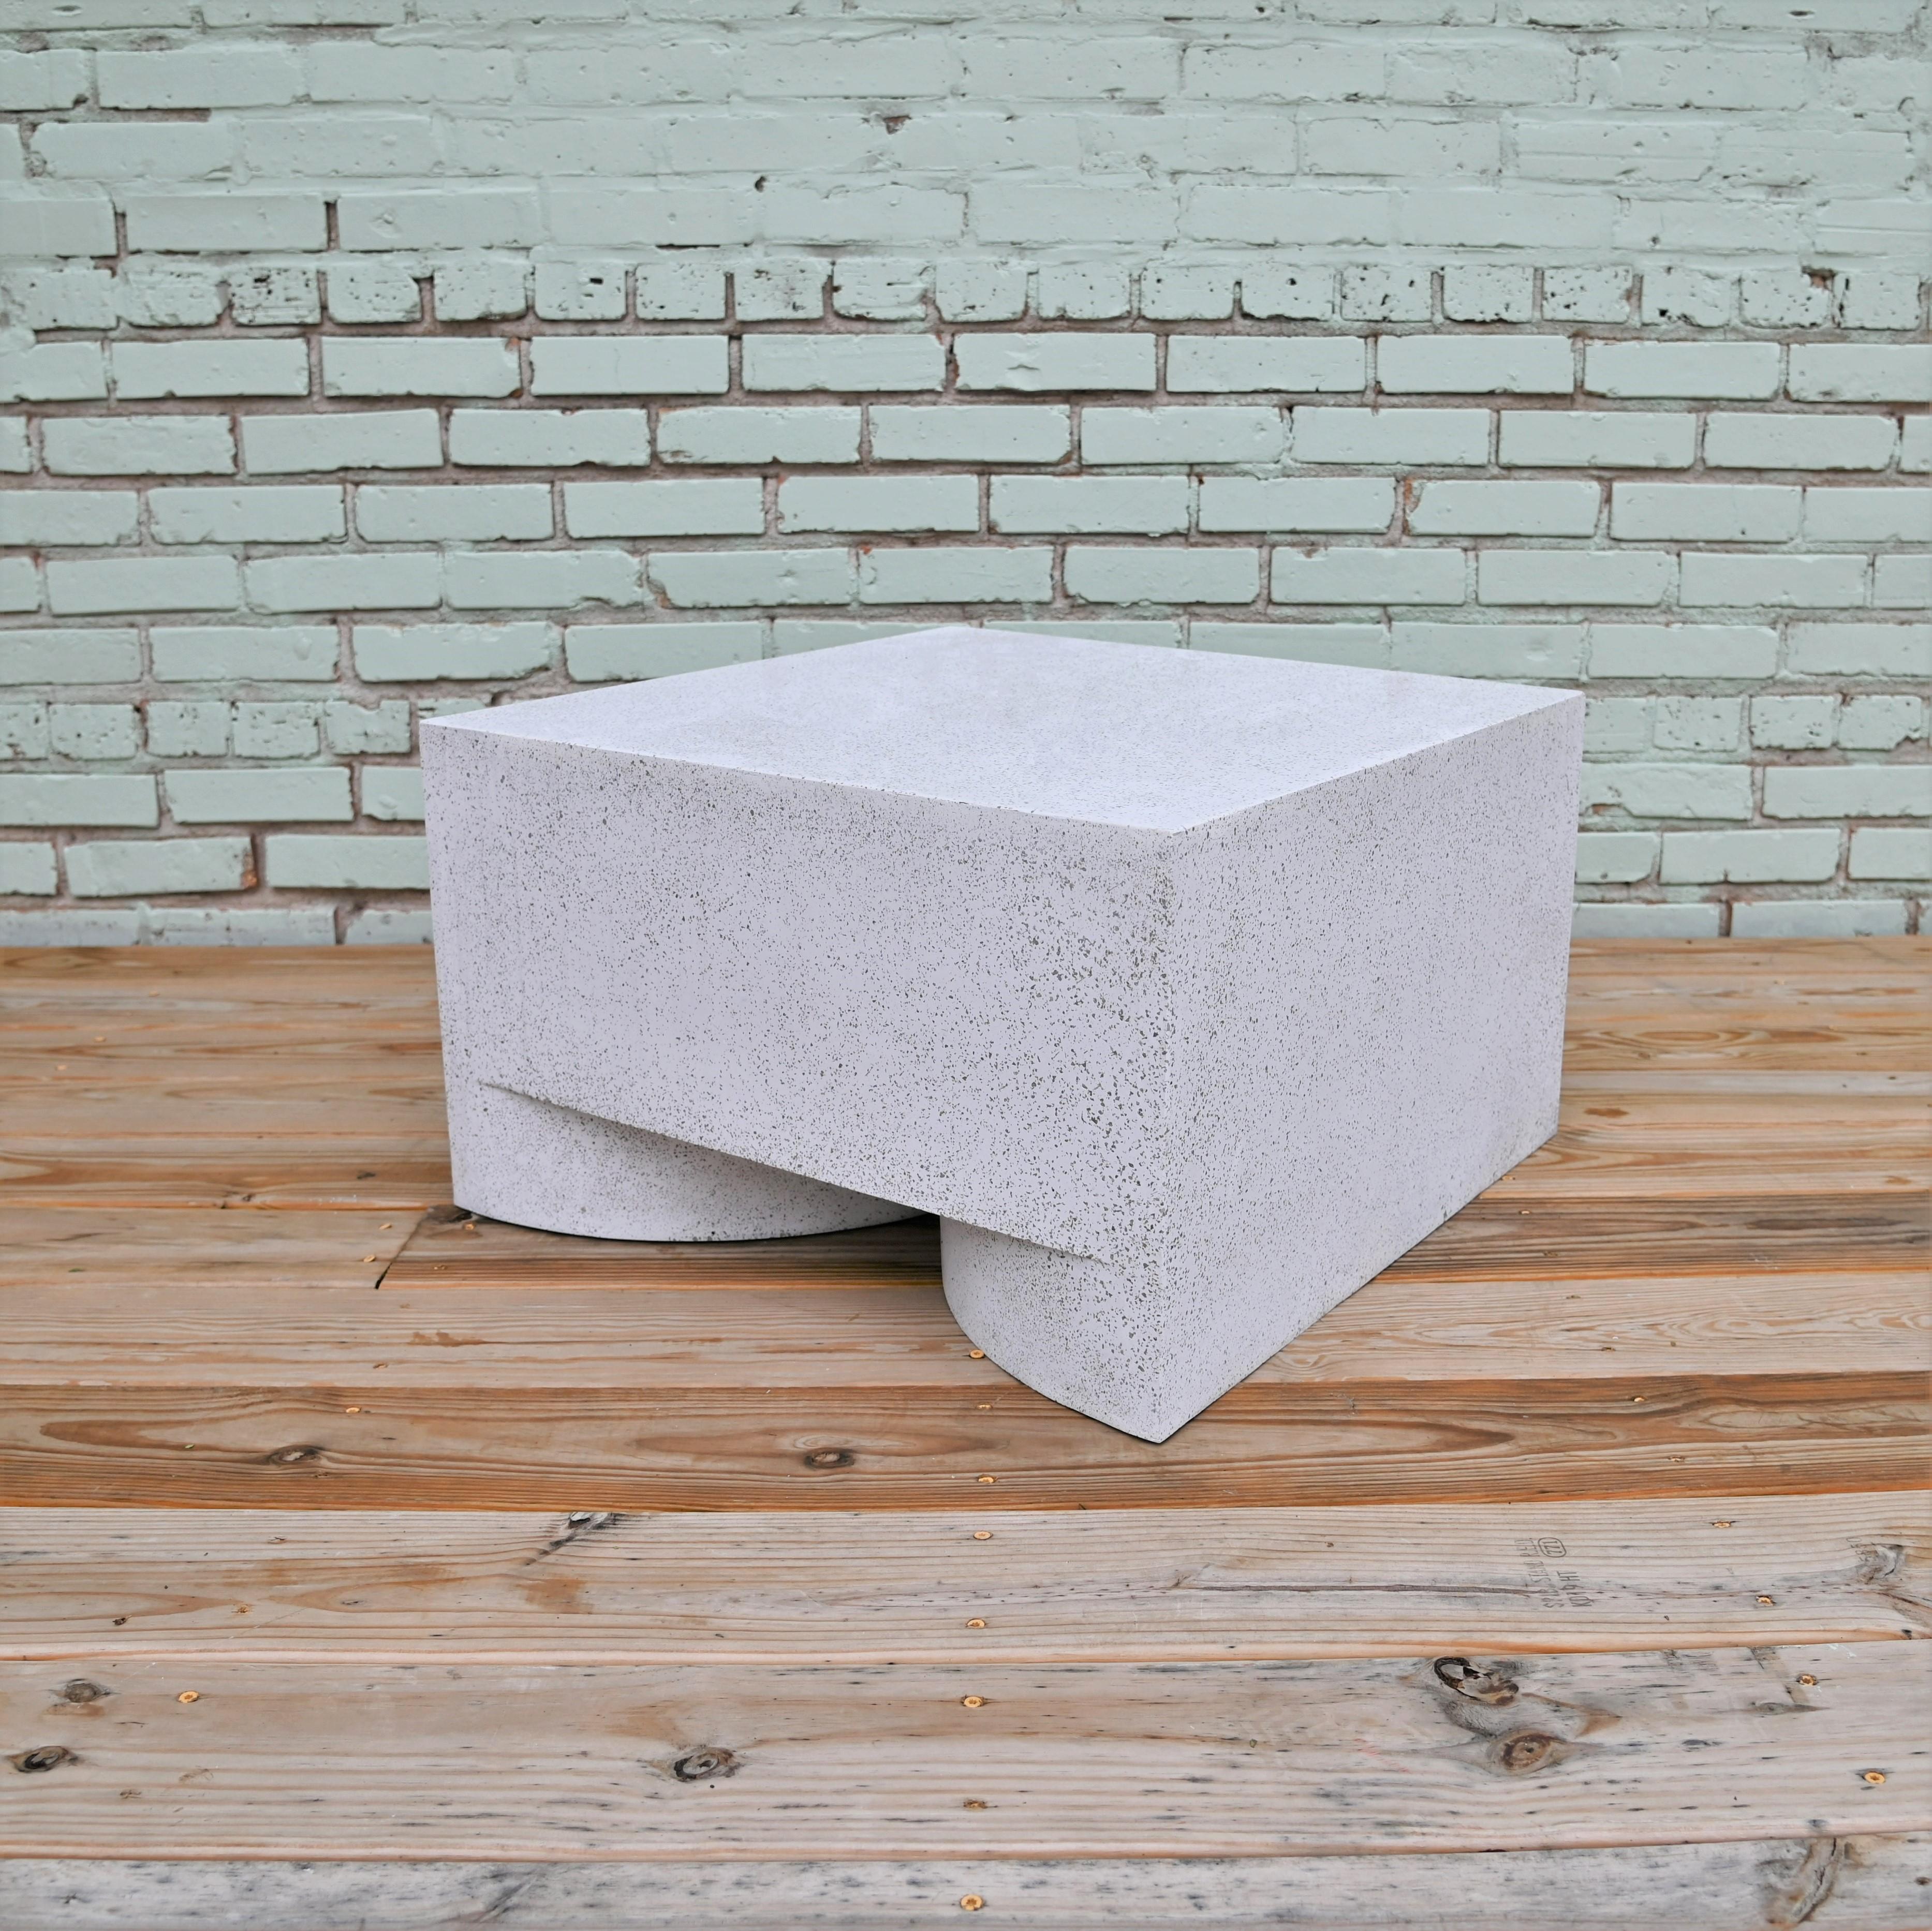 Dimensions: Width 24 in. (61 cm), depth 24 in. (61 cm), height 14.25 in. (36 cm). Weight 30 lbs. (14 kg).

Finish color options:
White stone
Natural stone (shown)
Aged stone
Keystone
Coal stone

Materials: resin, stone aggregate and